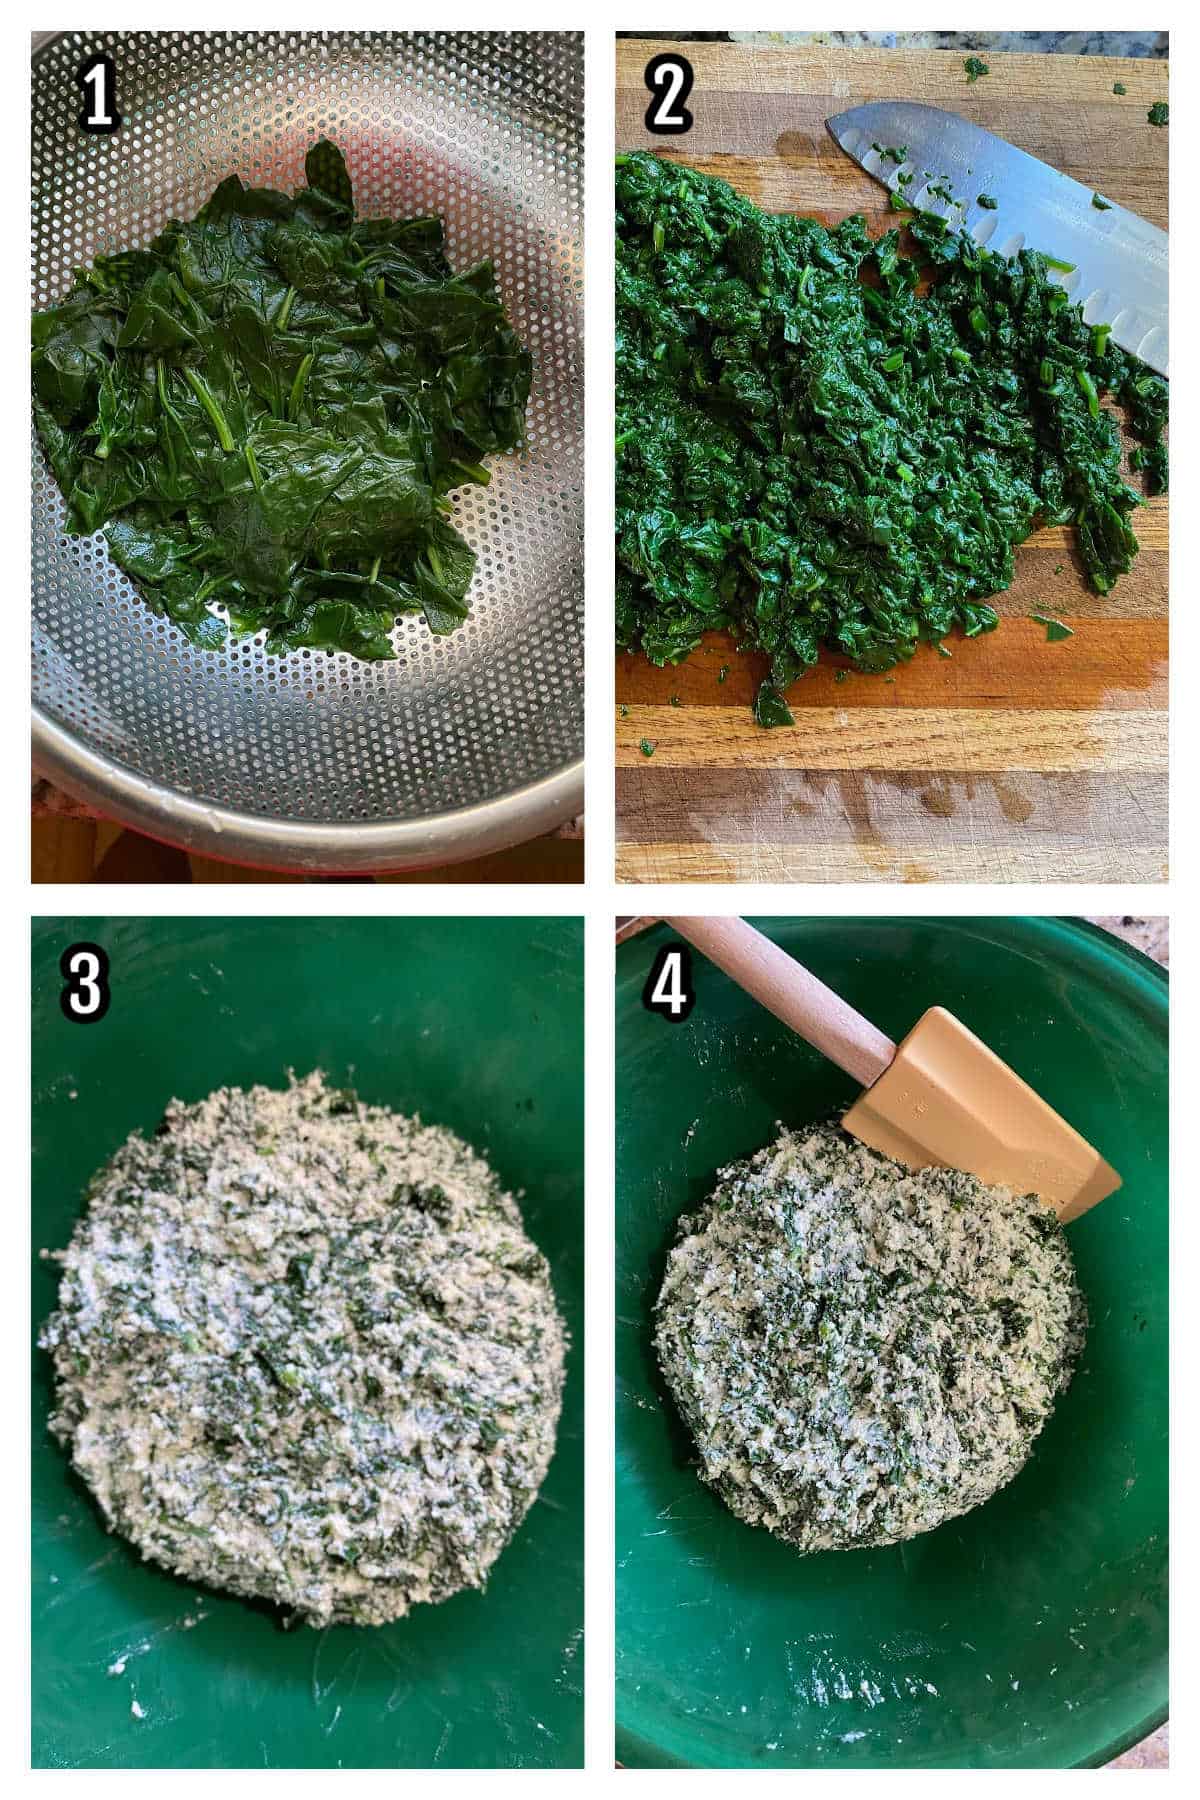 The four steps to making the ricotta spinach filling for the homemade ravioli. 